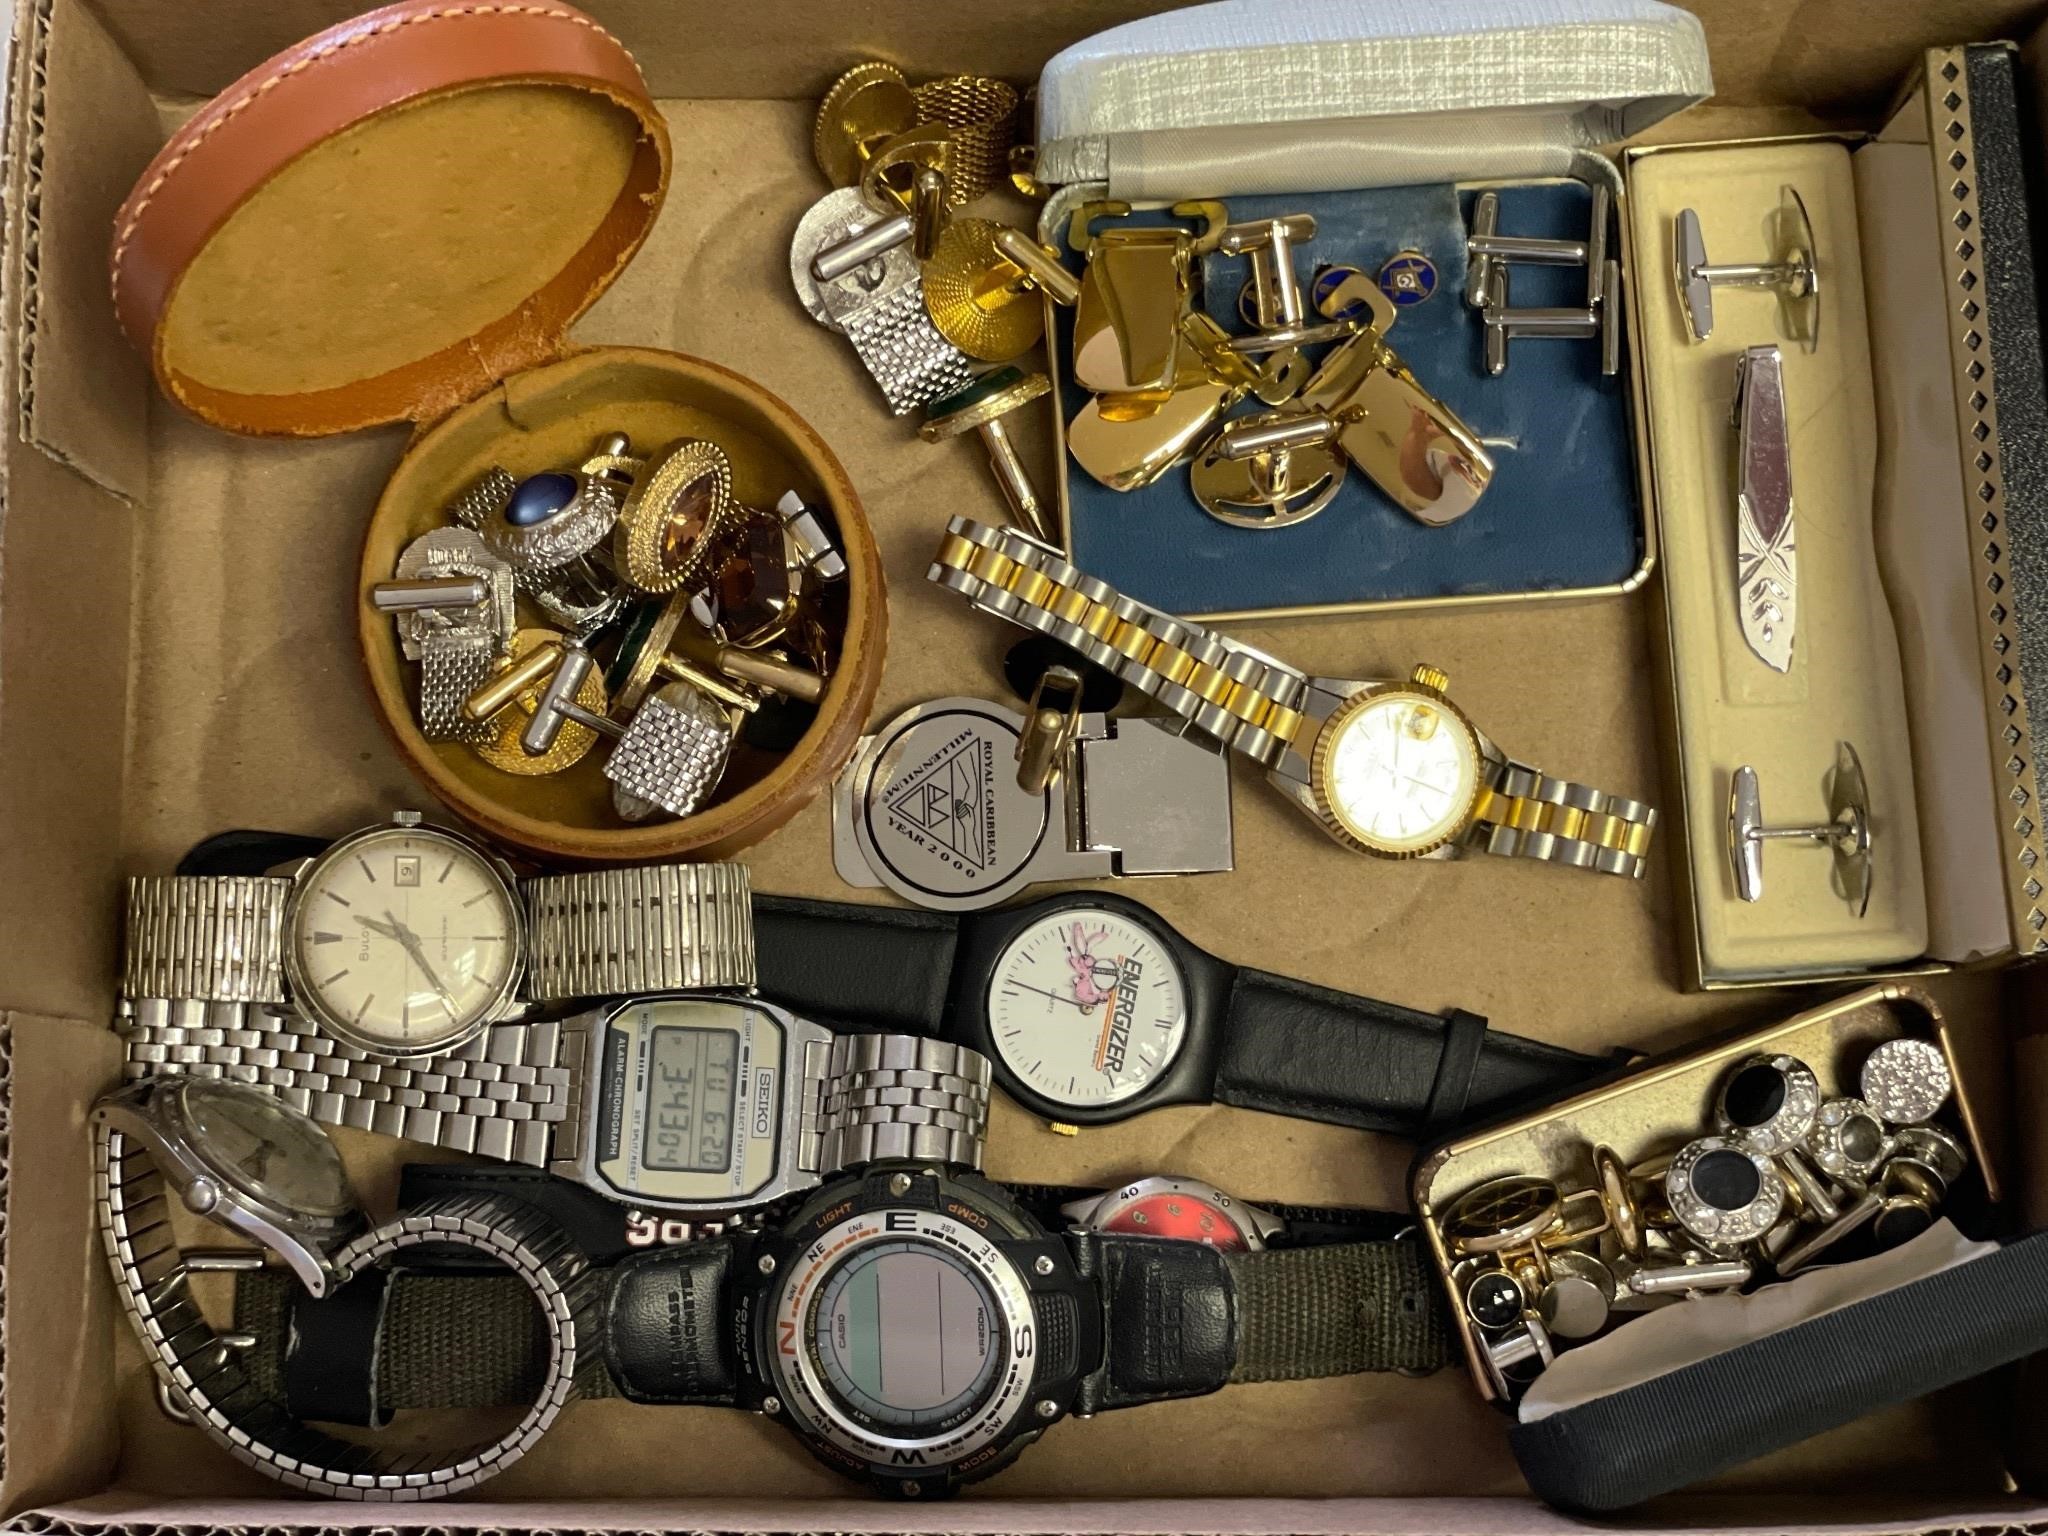 Assorted watches and cuff links